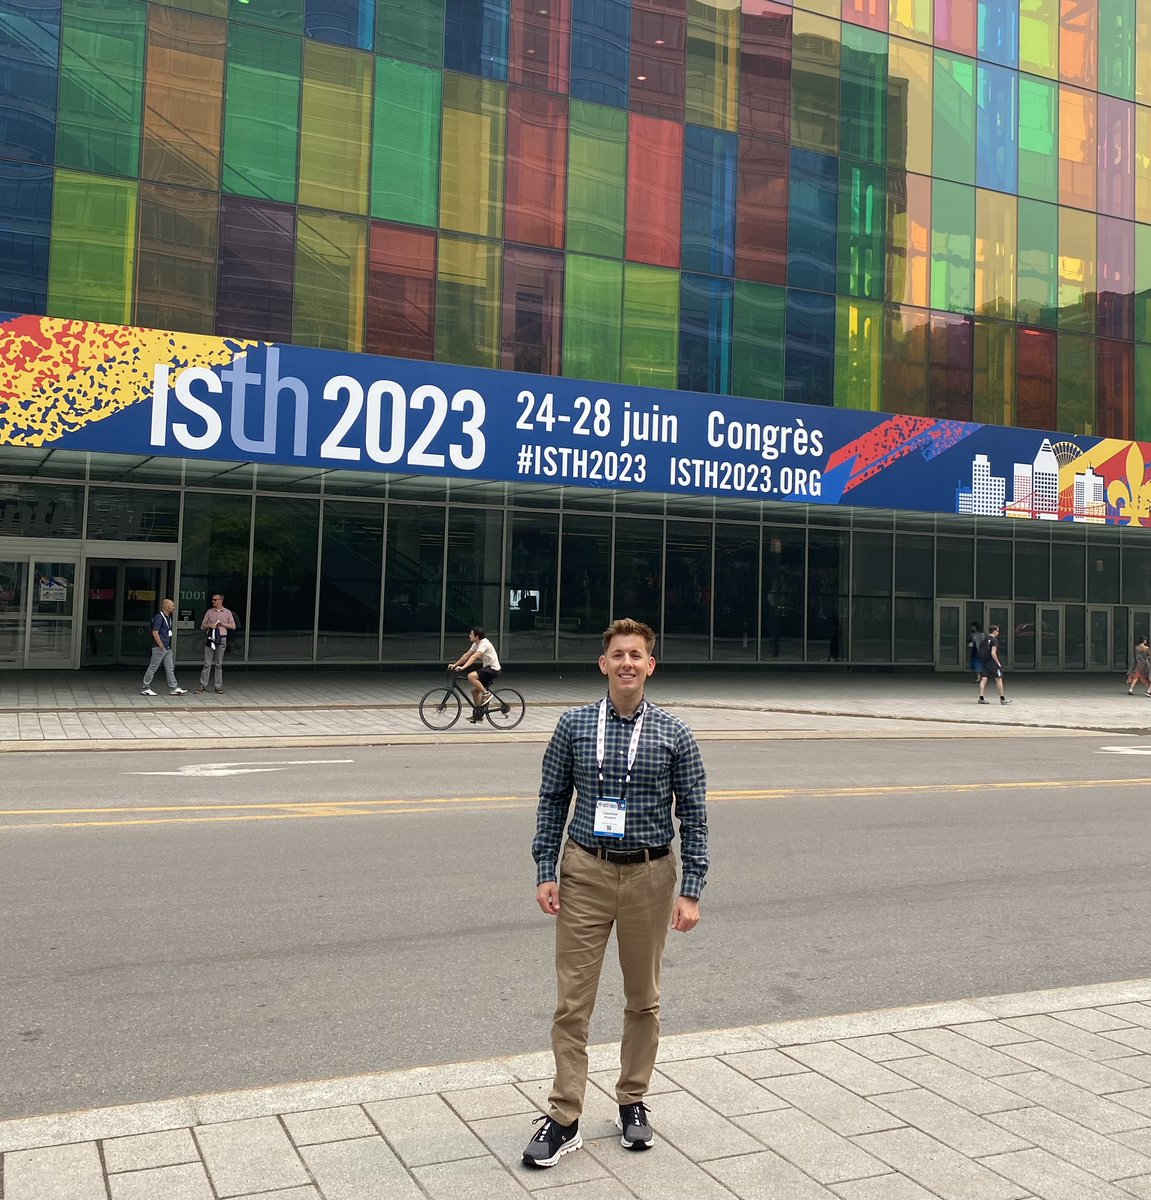 #ISTH2023 #Montreal 🍁 🇨🇦 

@isth @PulseInSync #haemophilia #hemophilia #haemostasis #hemostasis #thrombosis #bleedingdisorders #clottingdisorders #raredisease #science #research #innovation #drugdiscovery #patientadvocacy